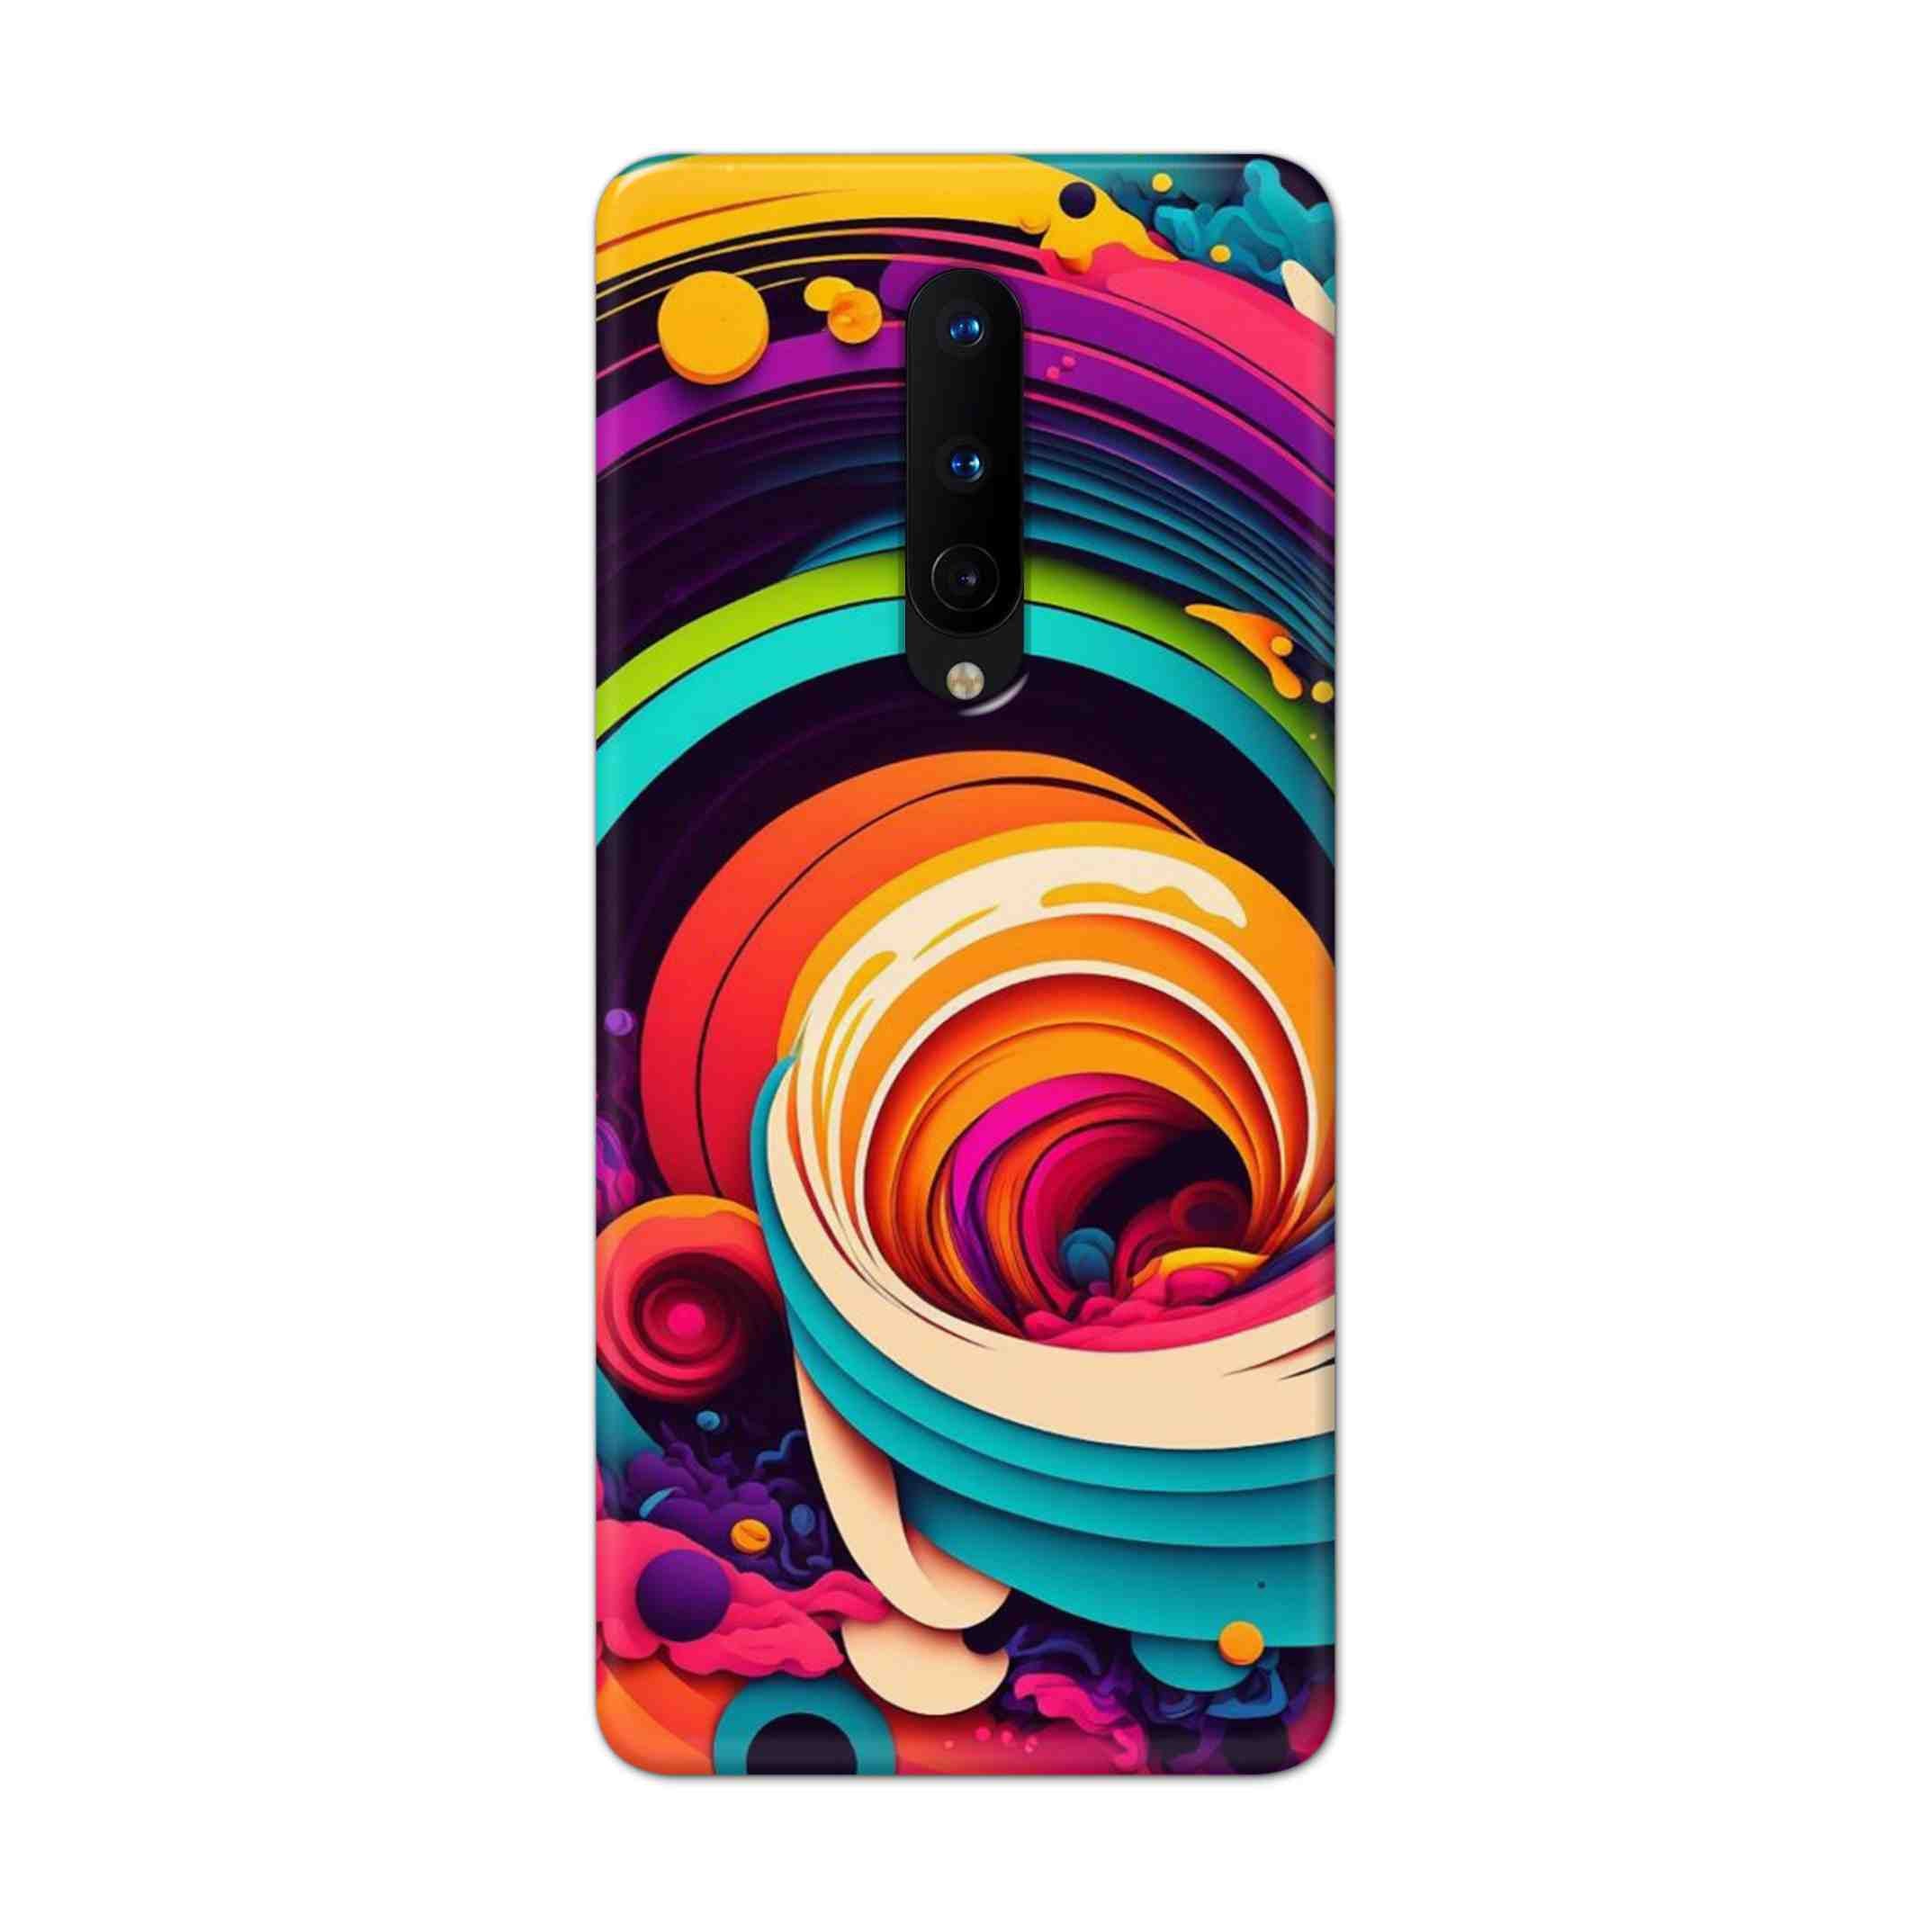 Buy Colour Circle Hard Back Mobile Phone Case Cover For OnePlus 8 Online